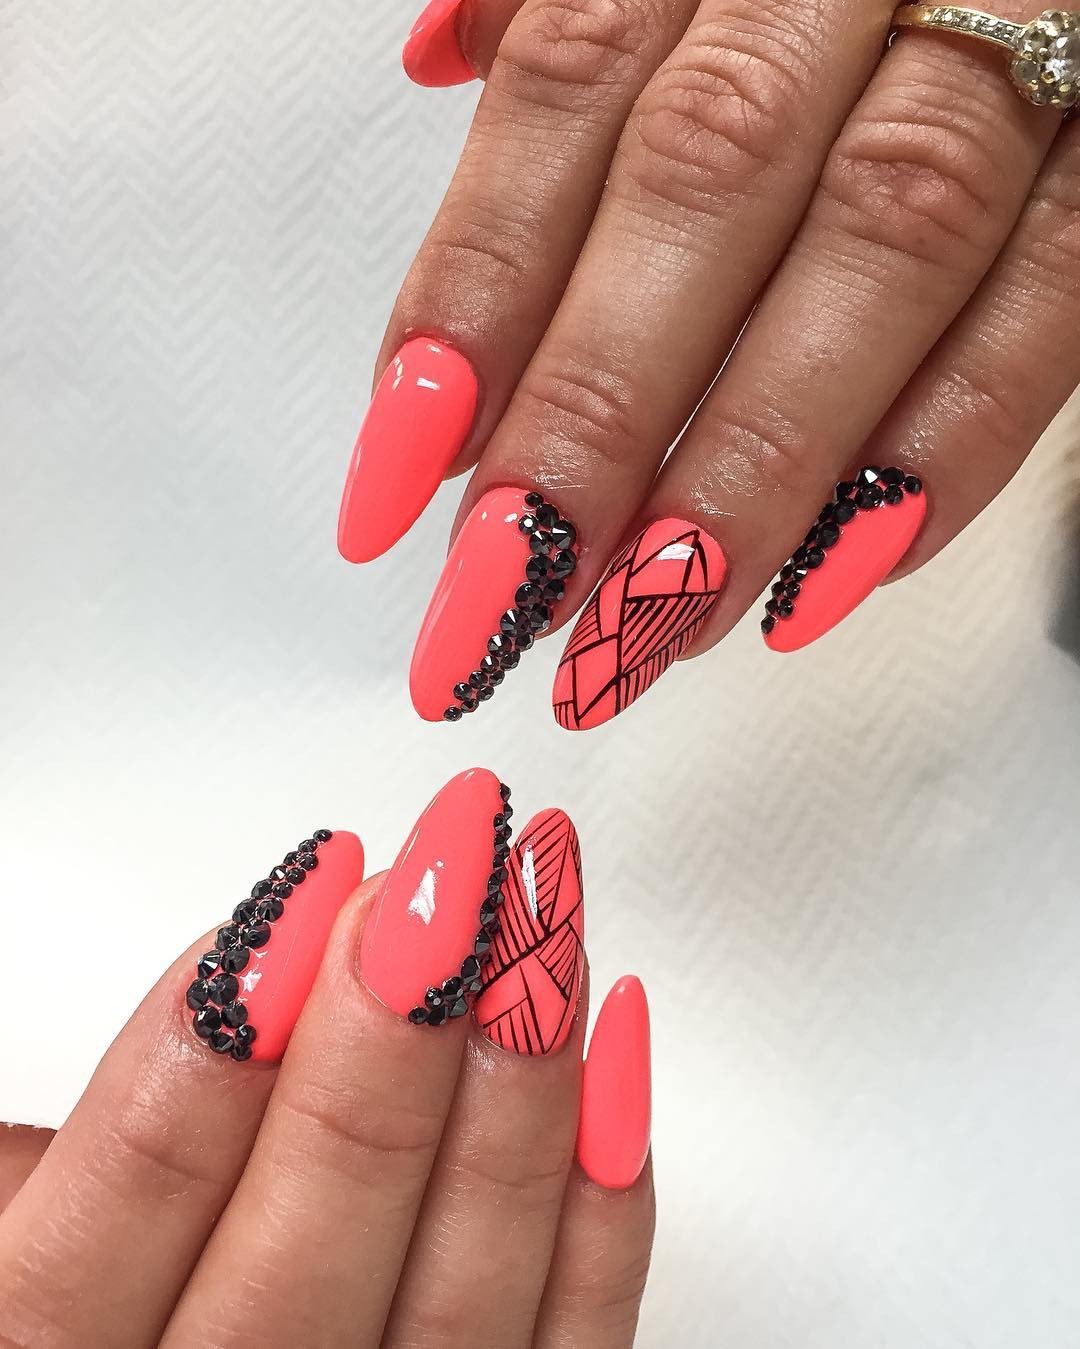 Almond Nail Designs
 Top 45 Luxury Almond Shaped Nails